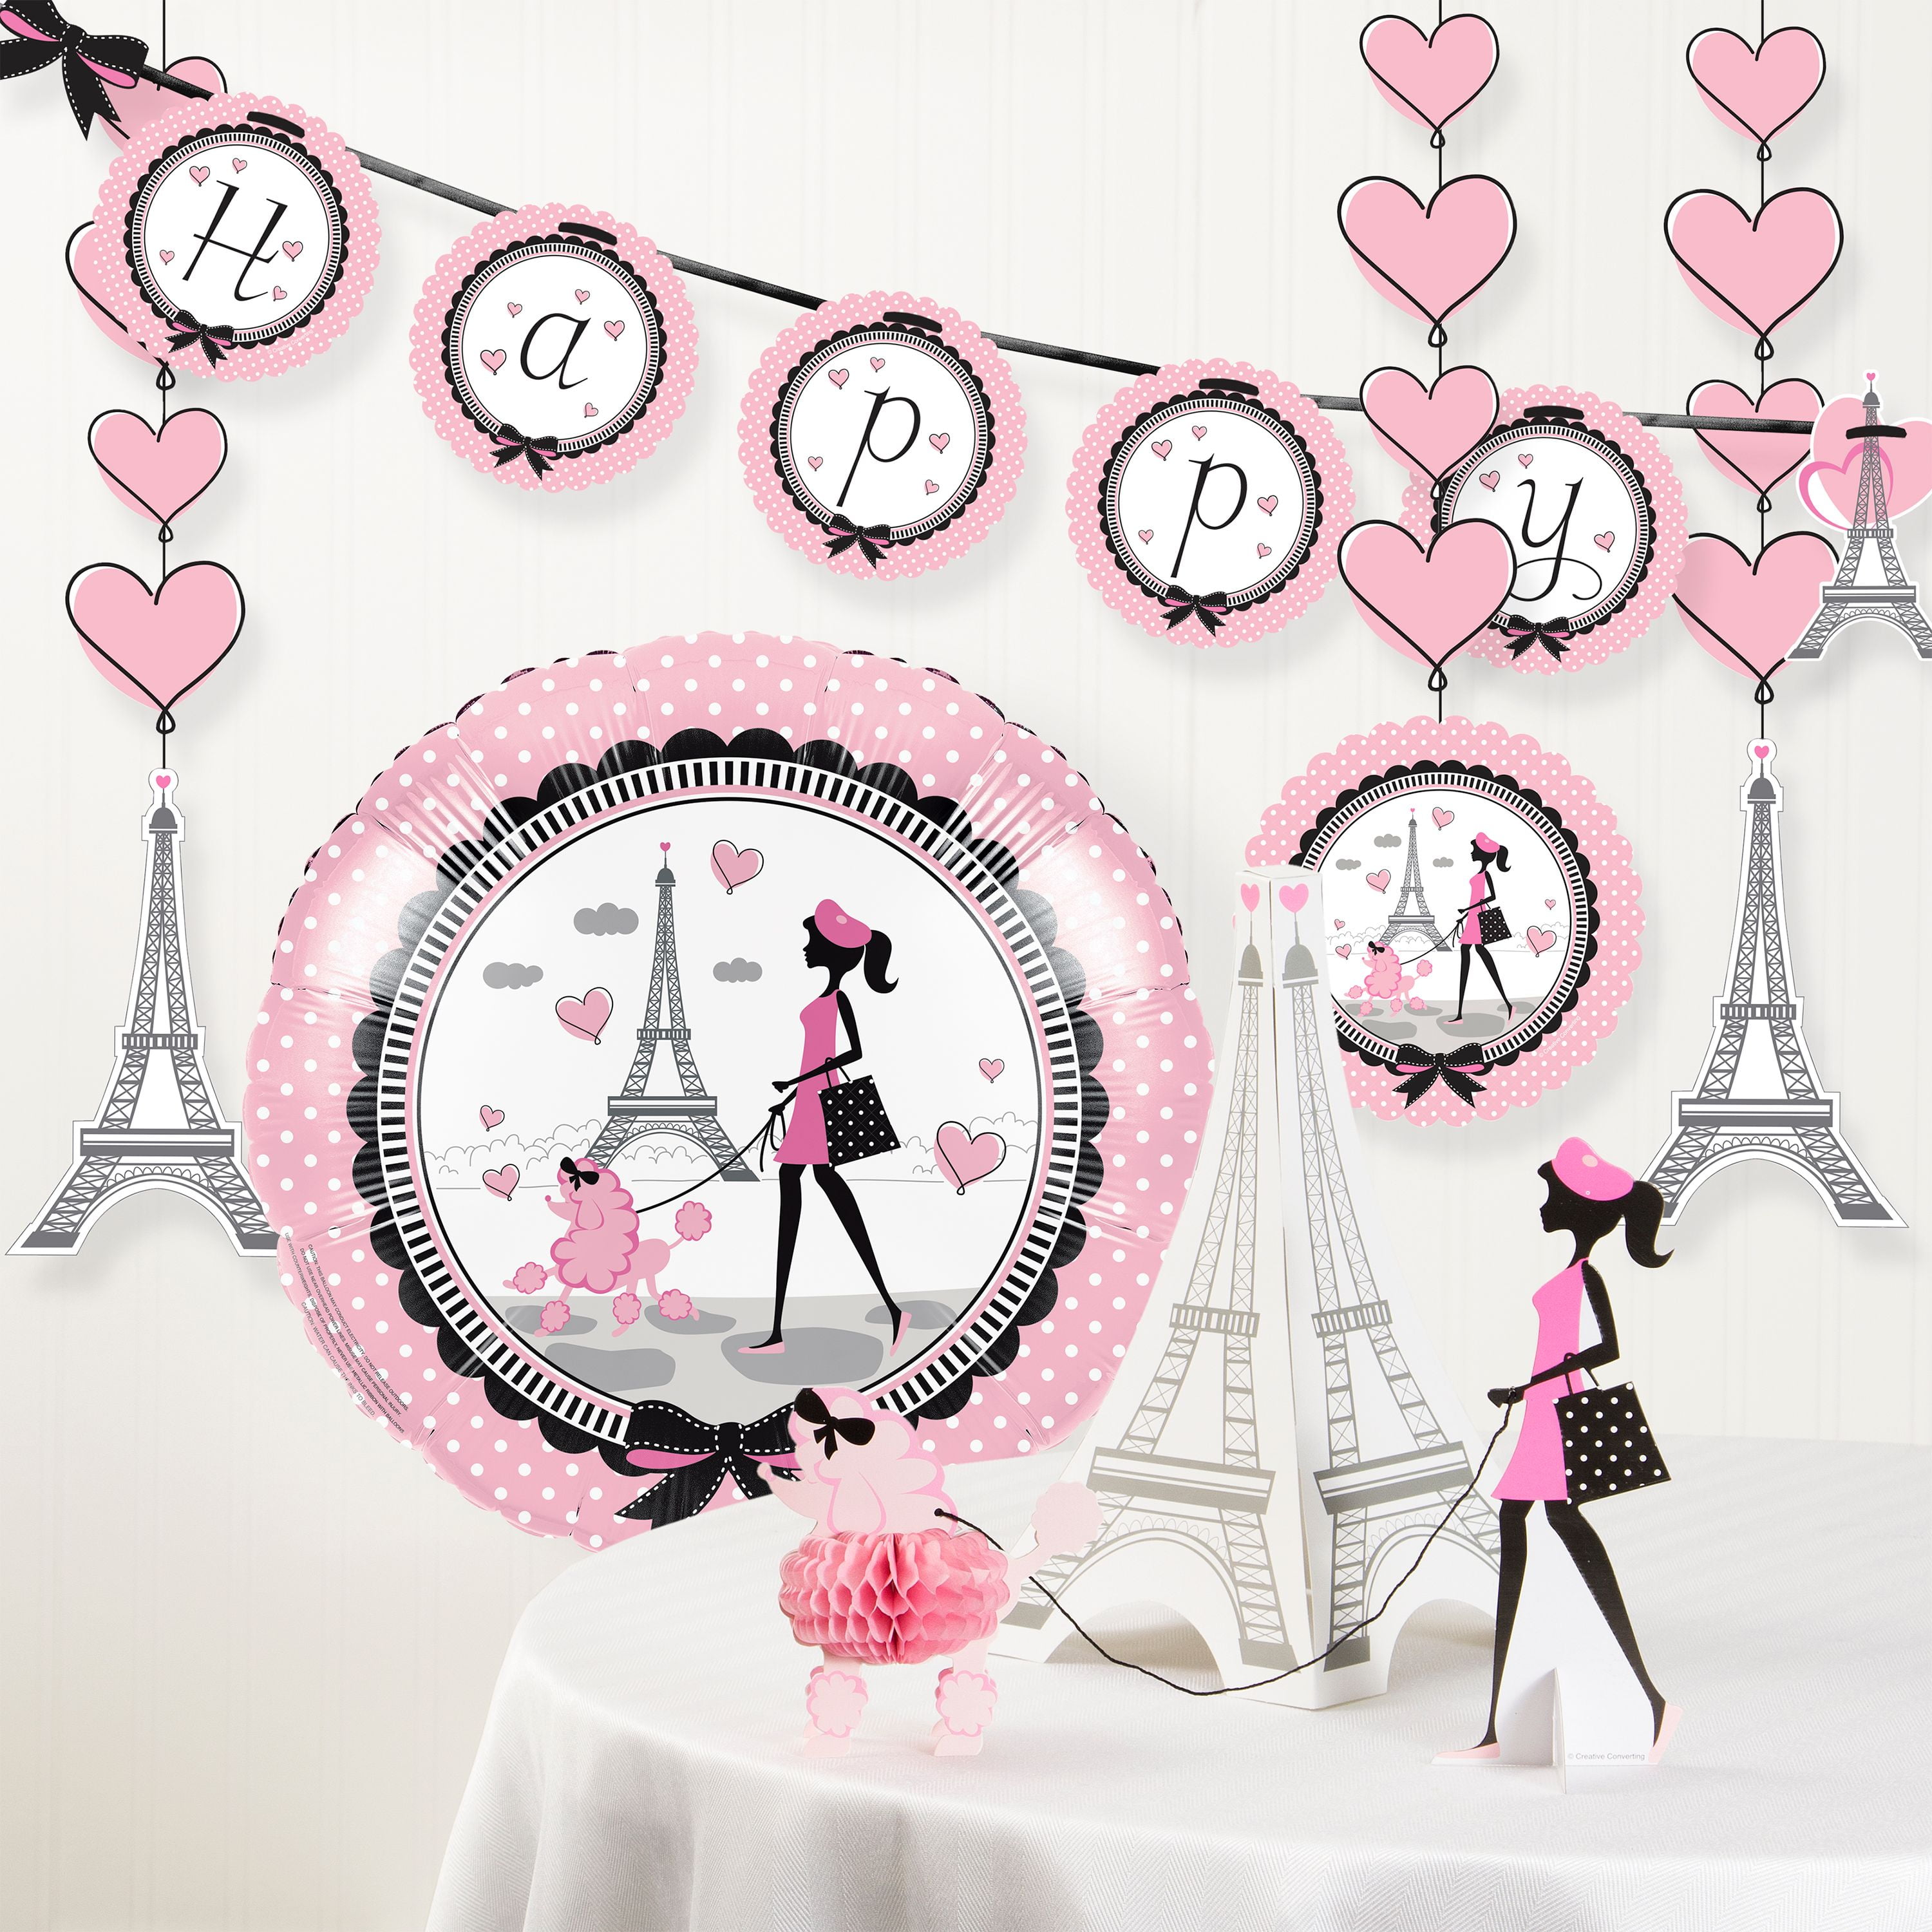 12 Ct for sale online Fun Express Pink Paris Party Hanging Swirl Decorations 